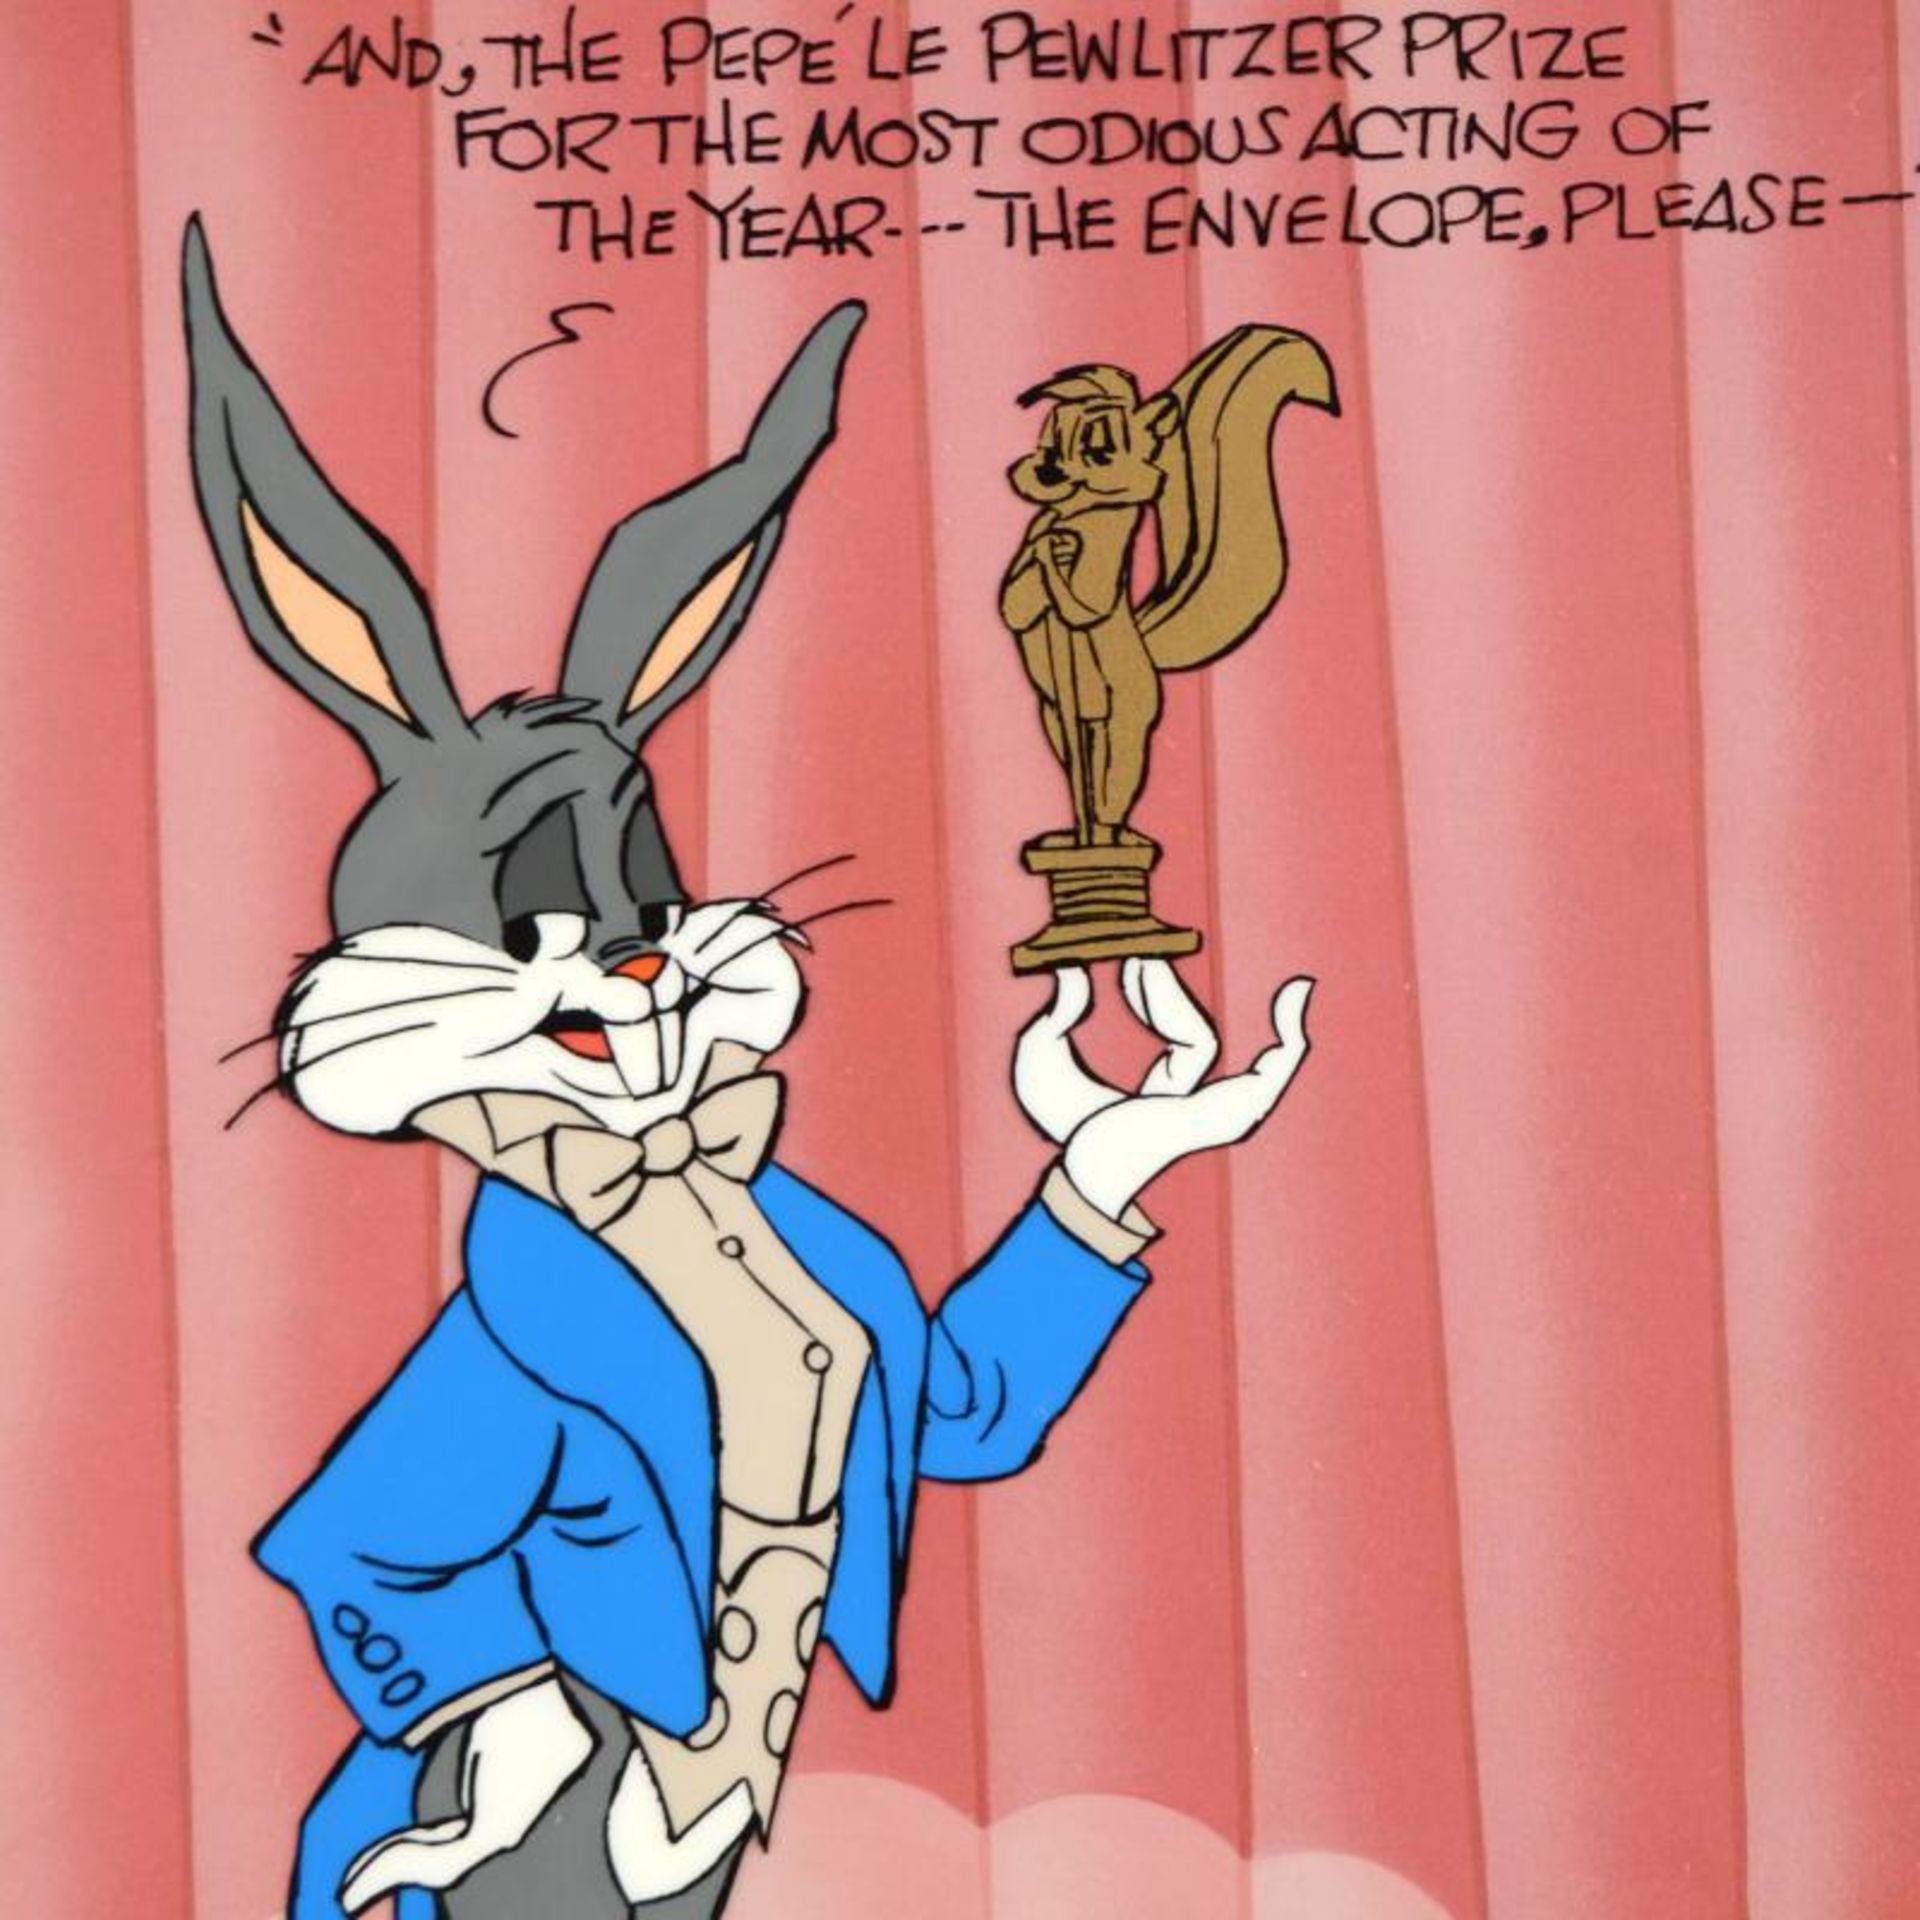 Pewlitzer Prize by Chuck Jones (1912-2002) - Image 2 of 2